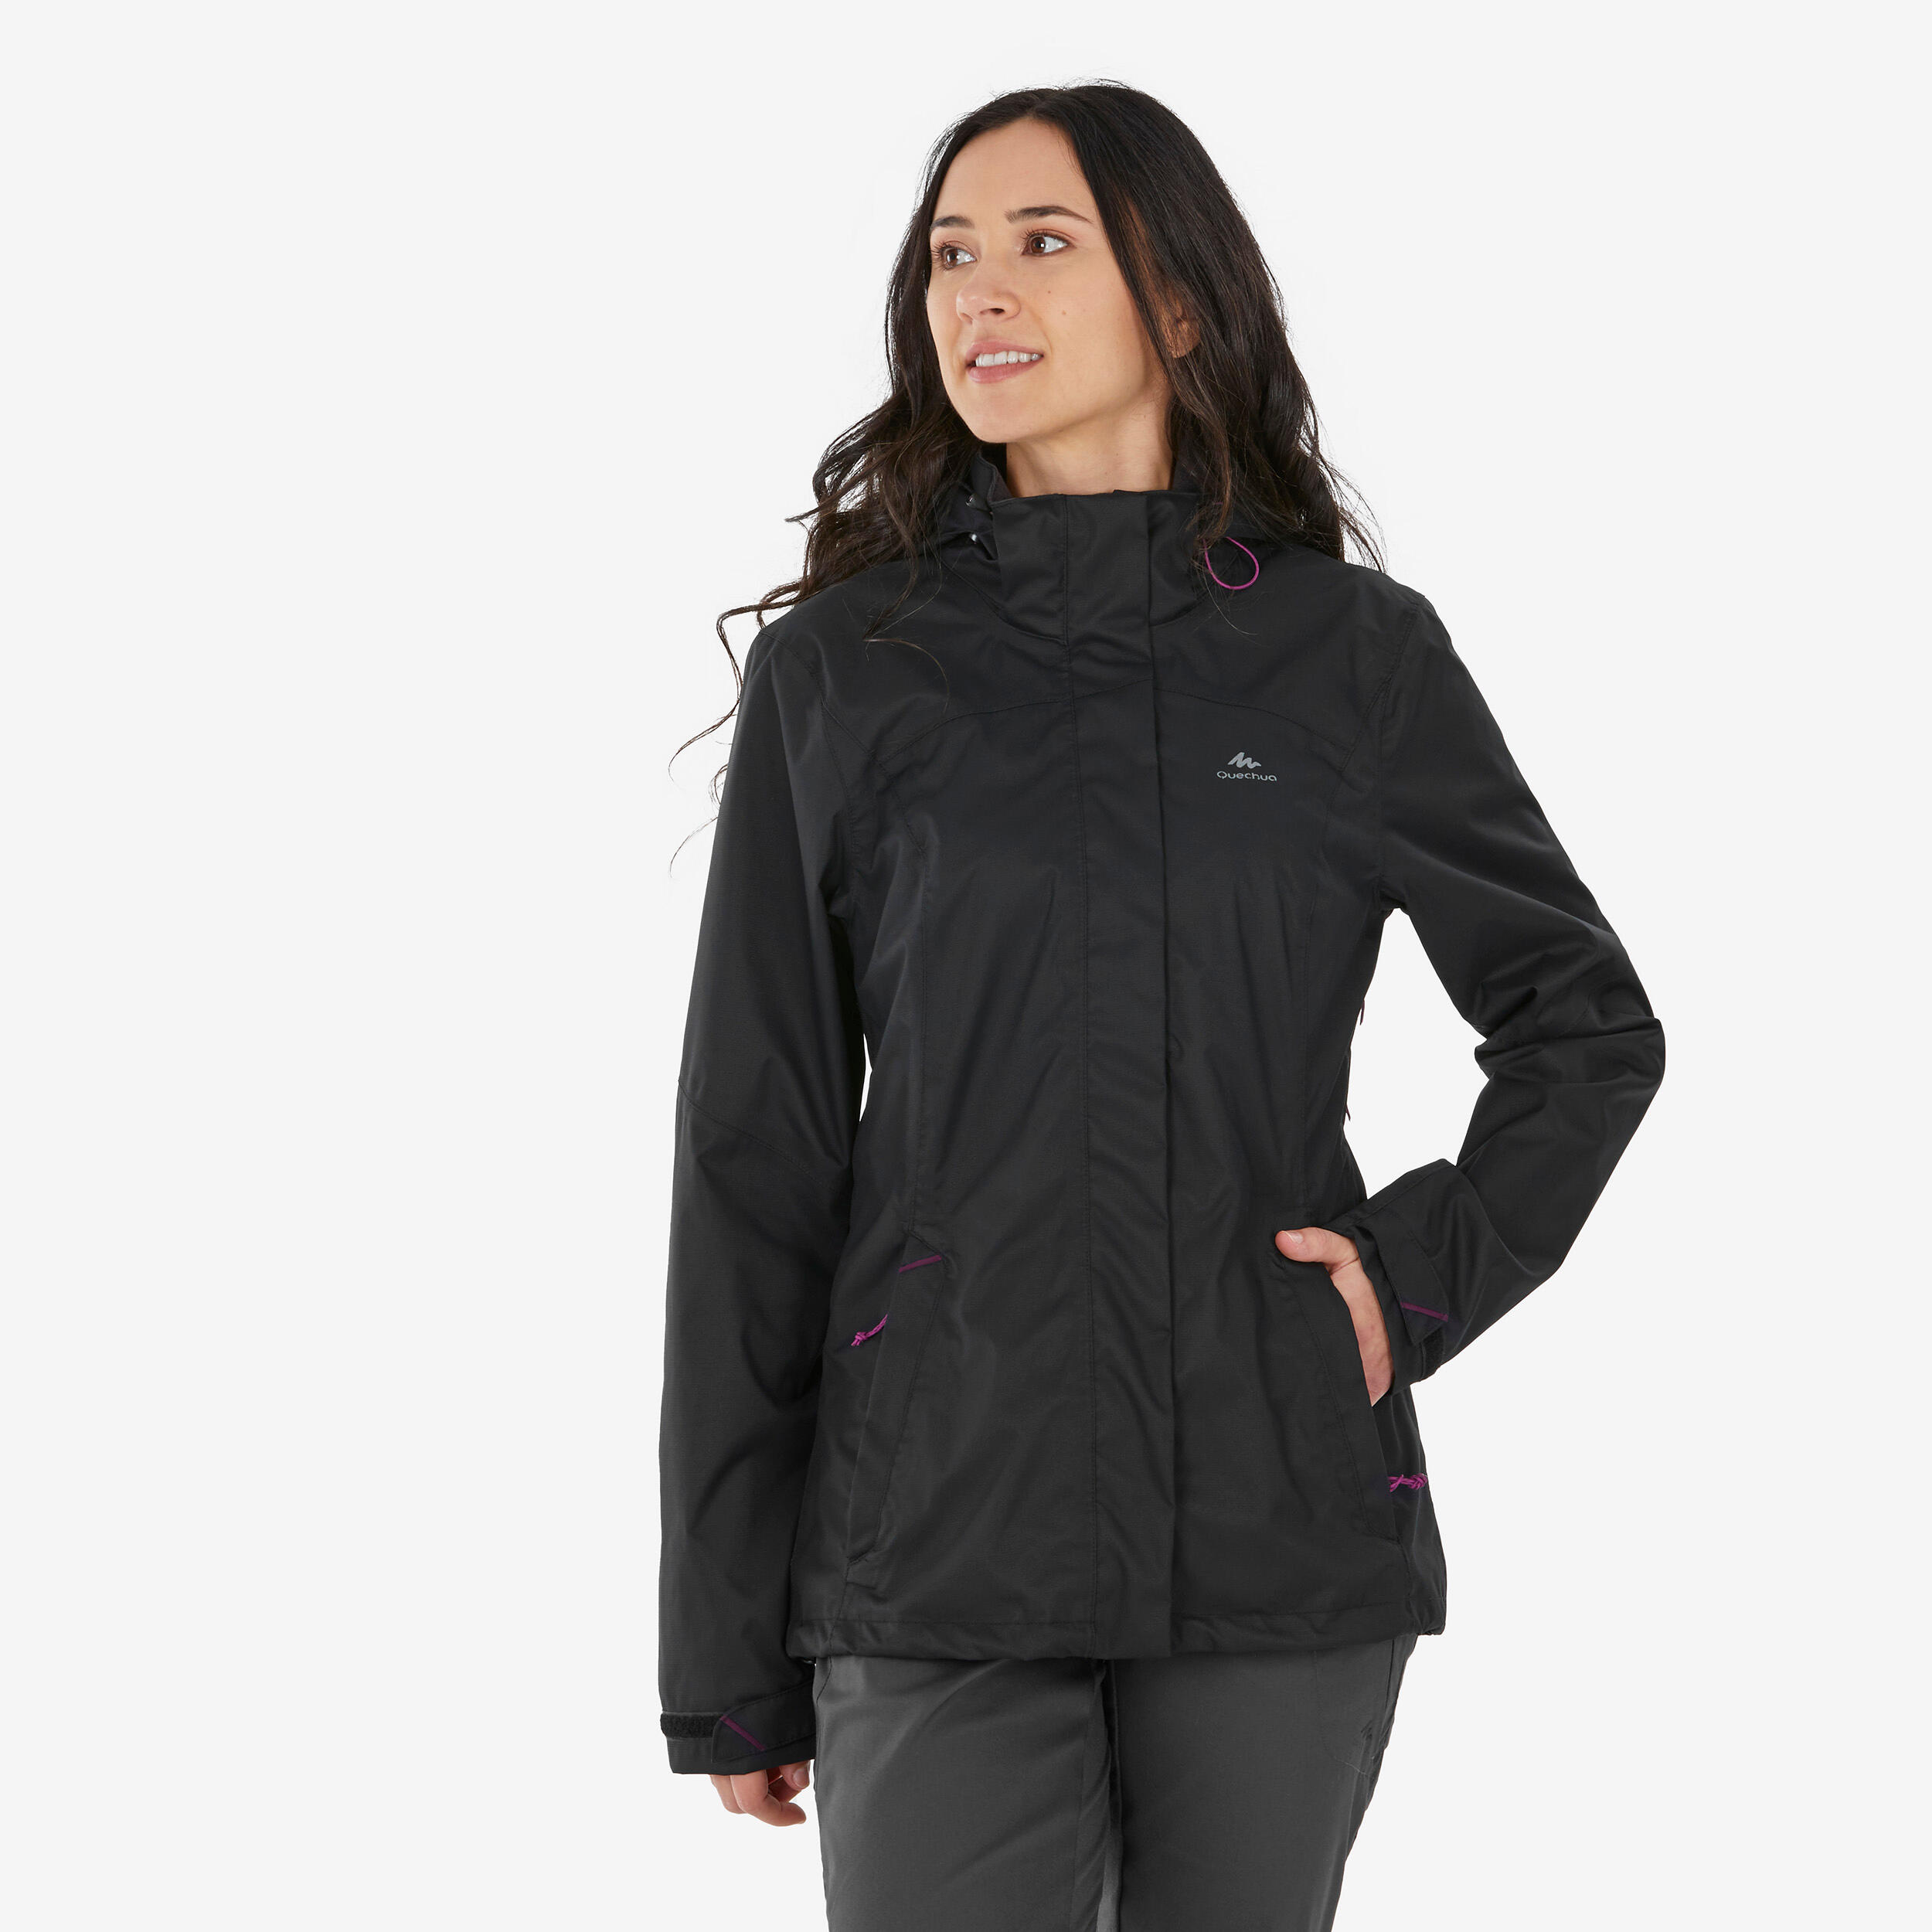 Forclaz Trek 100 Down Jacket | A down feather jacket that weighs 290g and  keeps you warm up to -5 degrees with layering is the best choice you are  going to make